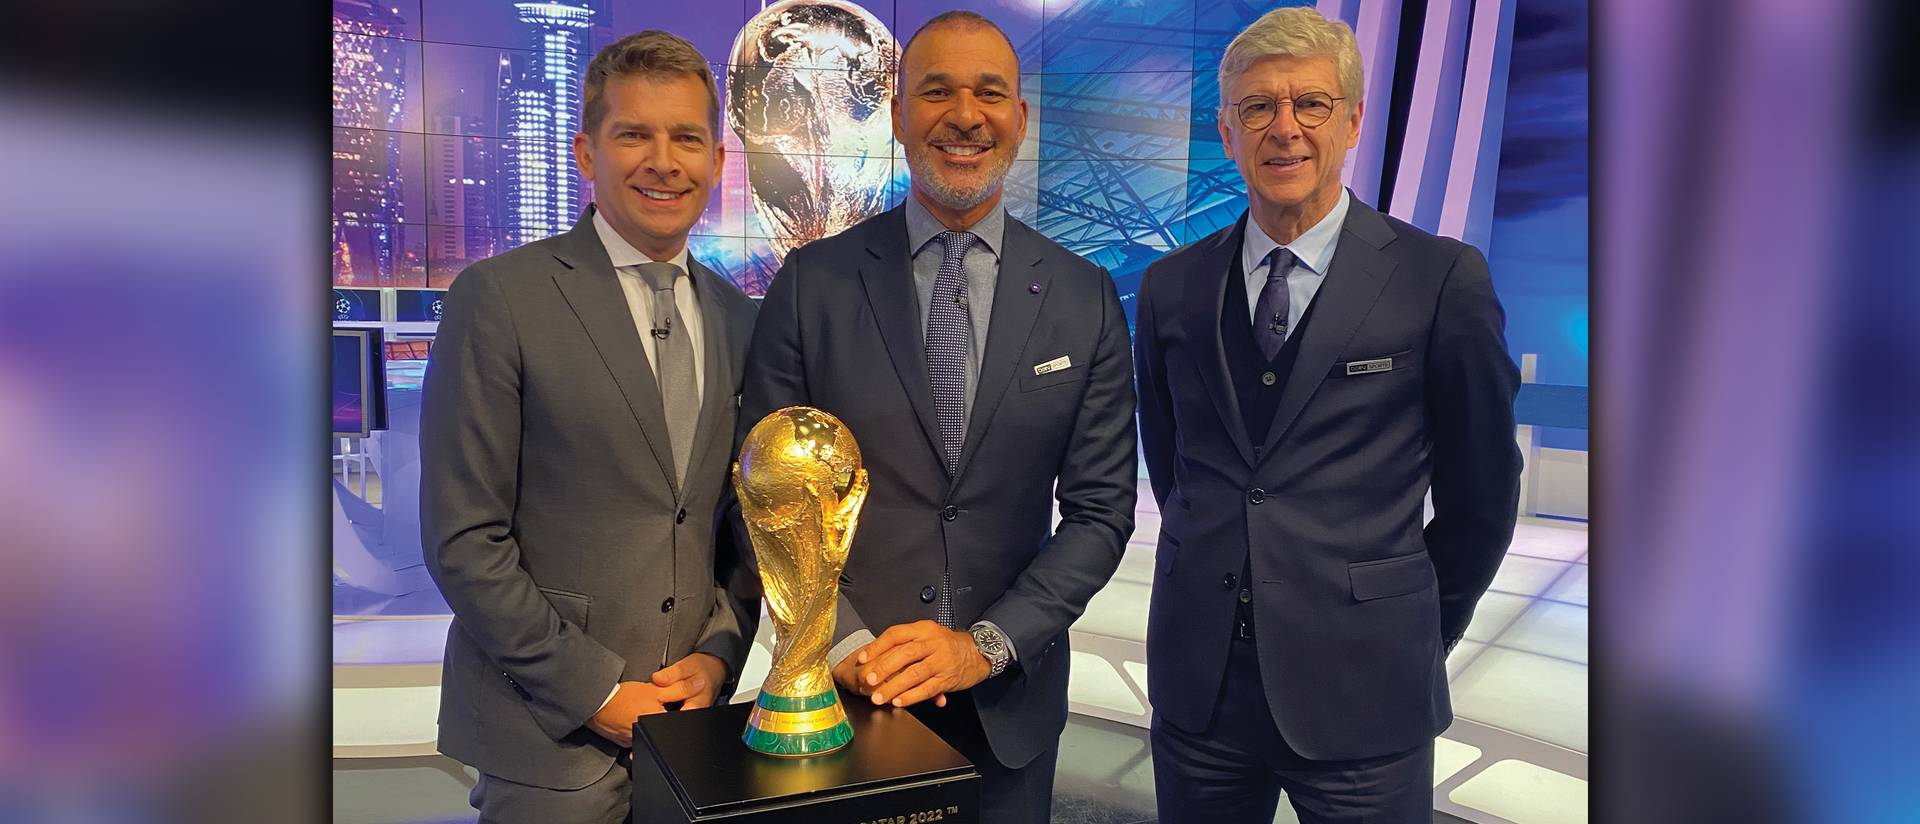 Photo of (from left) broadcasters Angus Scott, Ruud Gullit, a former Chelsea and Dutch national team player, and Arsène Wenger, former Arsenal manager, appearing on set at the Qatar World Cup with the Jules Rimet Trophy.